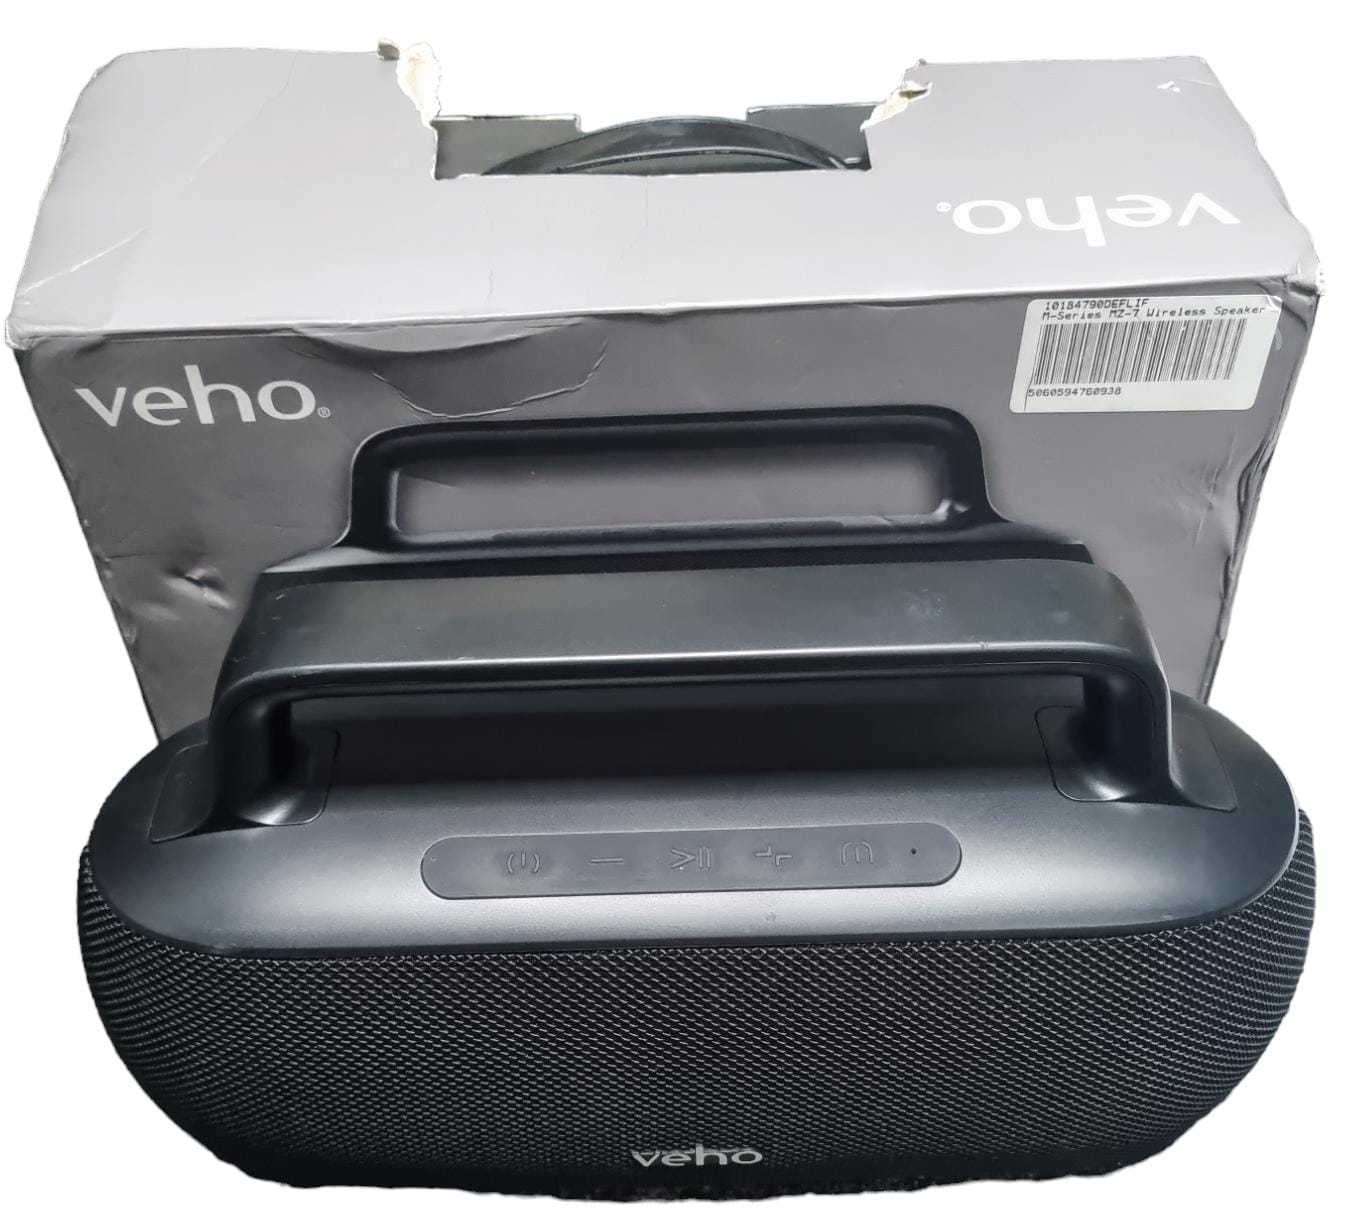 Veho - MZ7 Portable Wireless Speaker = Boxed with charger